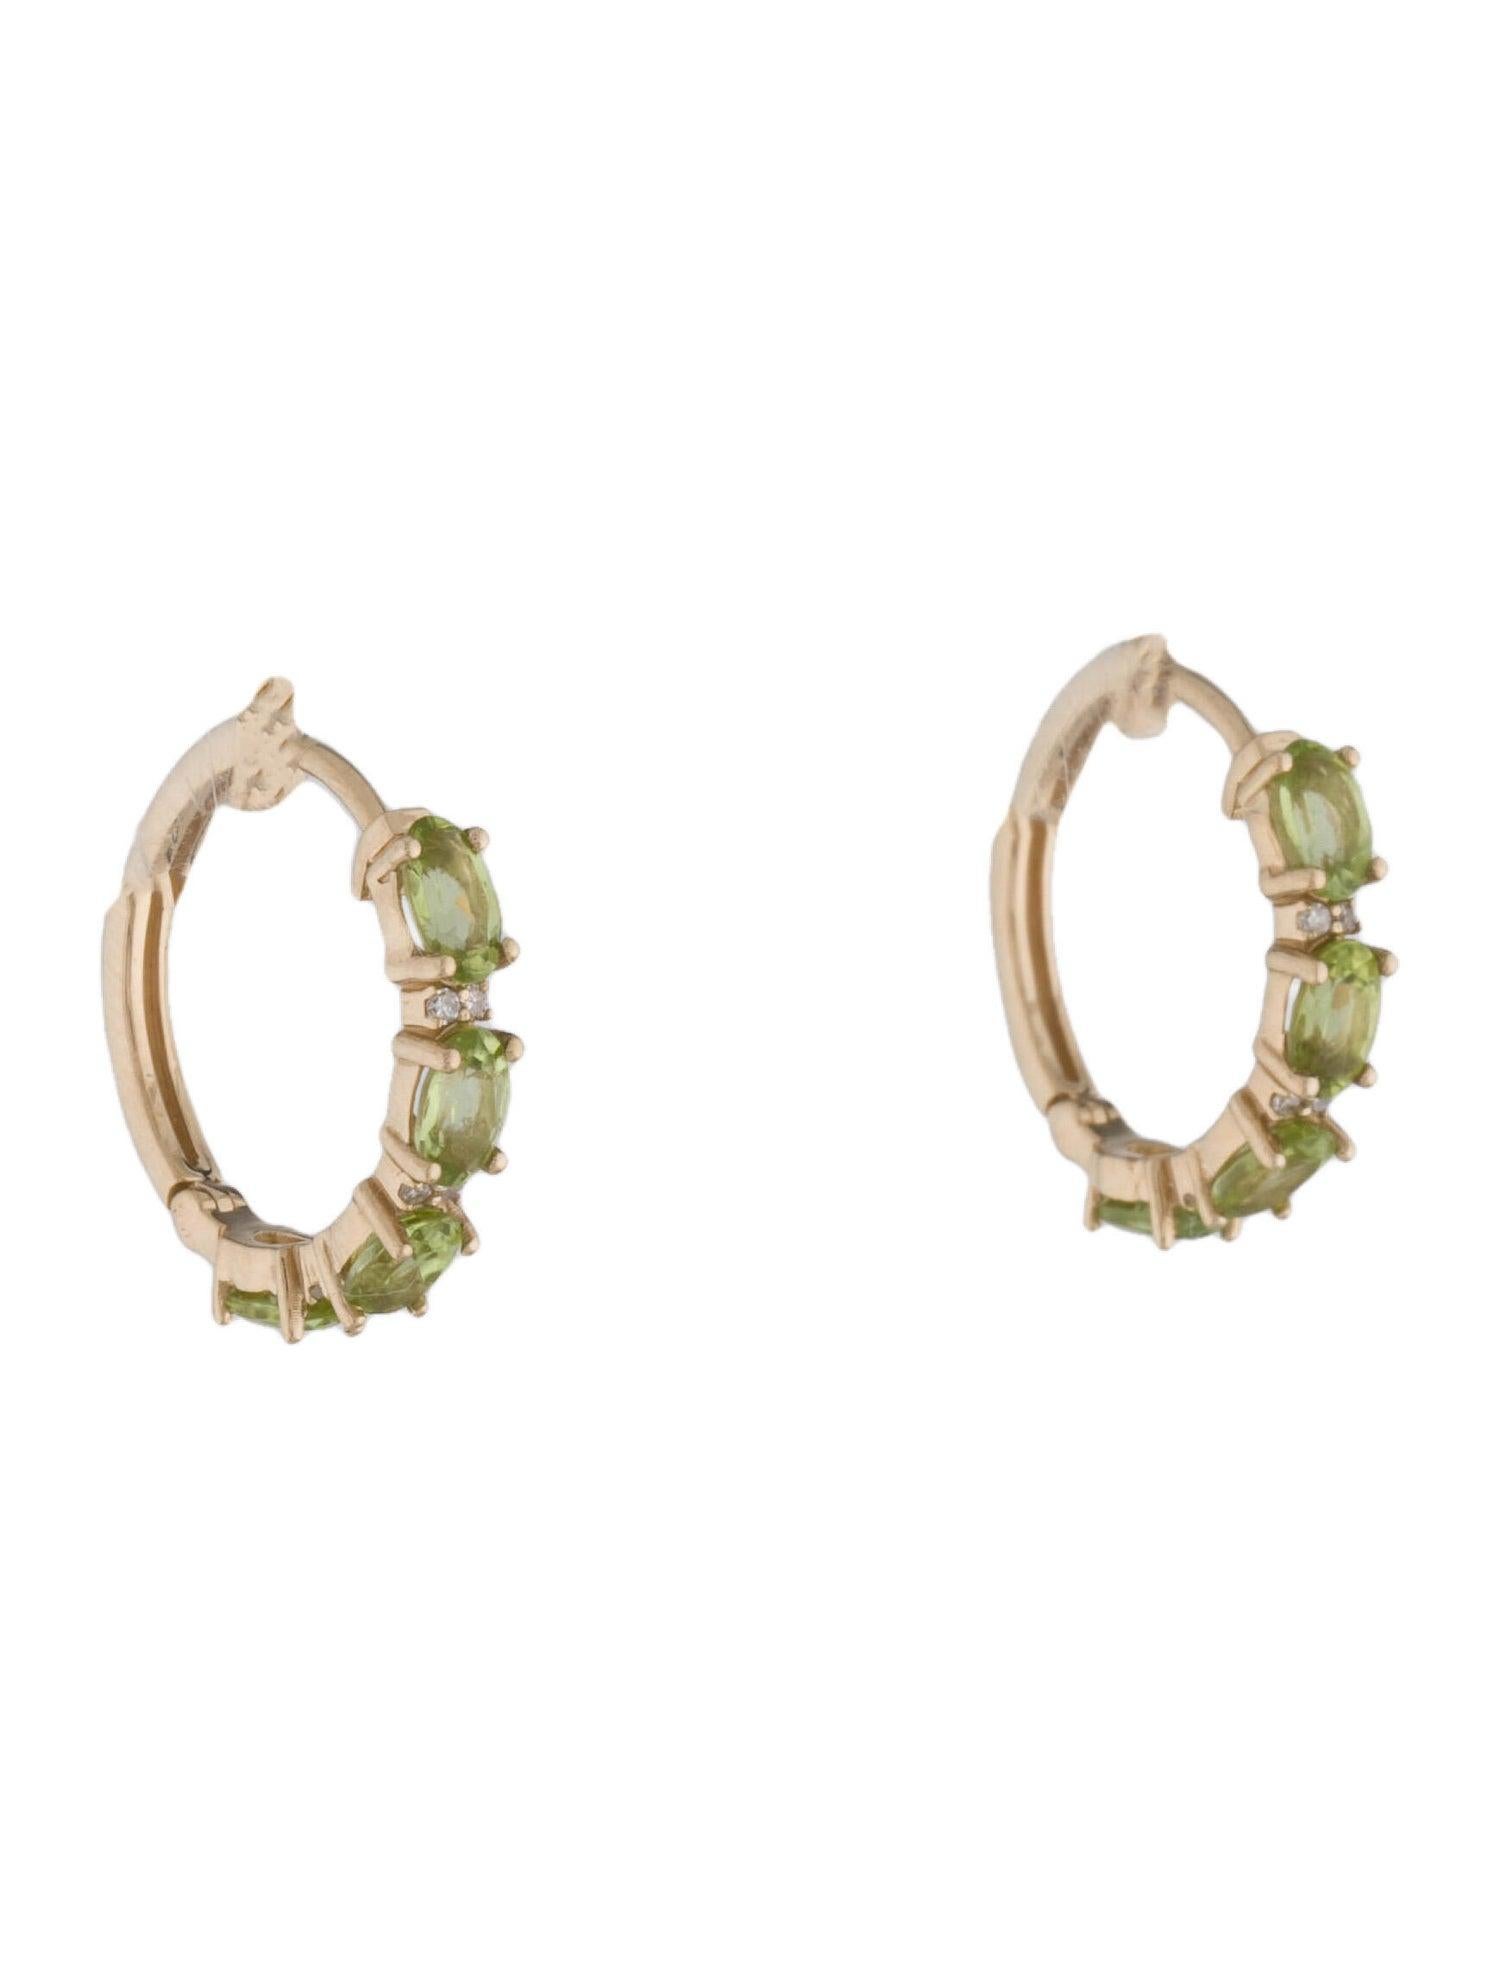 Immerse yourself in the serene allure of our Harmony in Green collection with these exquisite Peridot and Diamond earrings from Jeweltique. Crafted with meticulous attention to detail, these earrings are a testament to the brand's 50-year legacy of